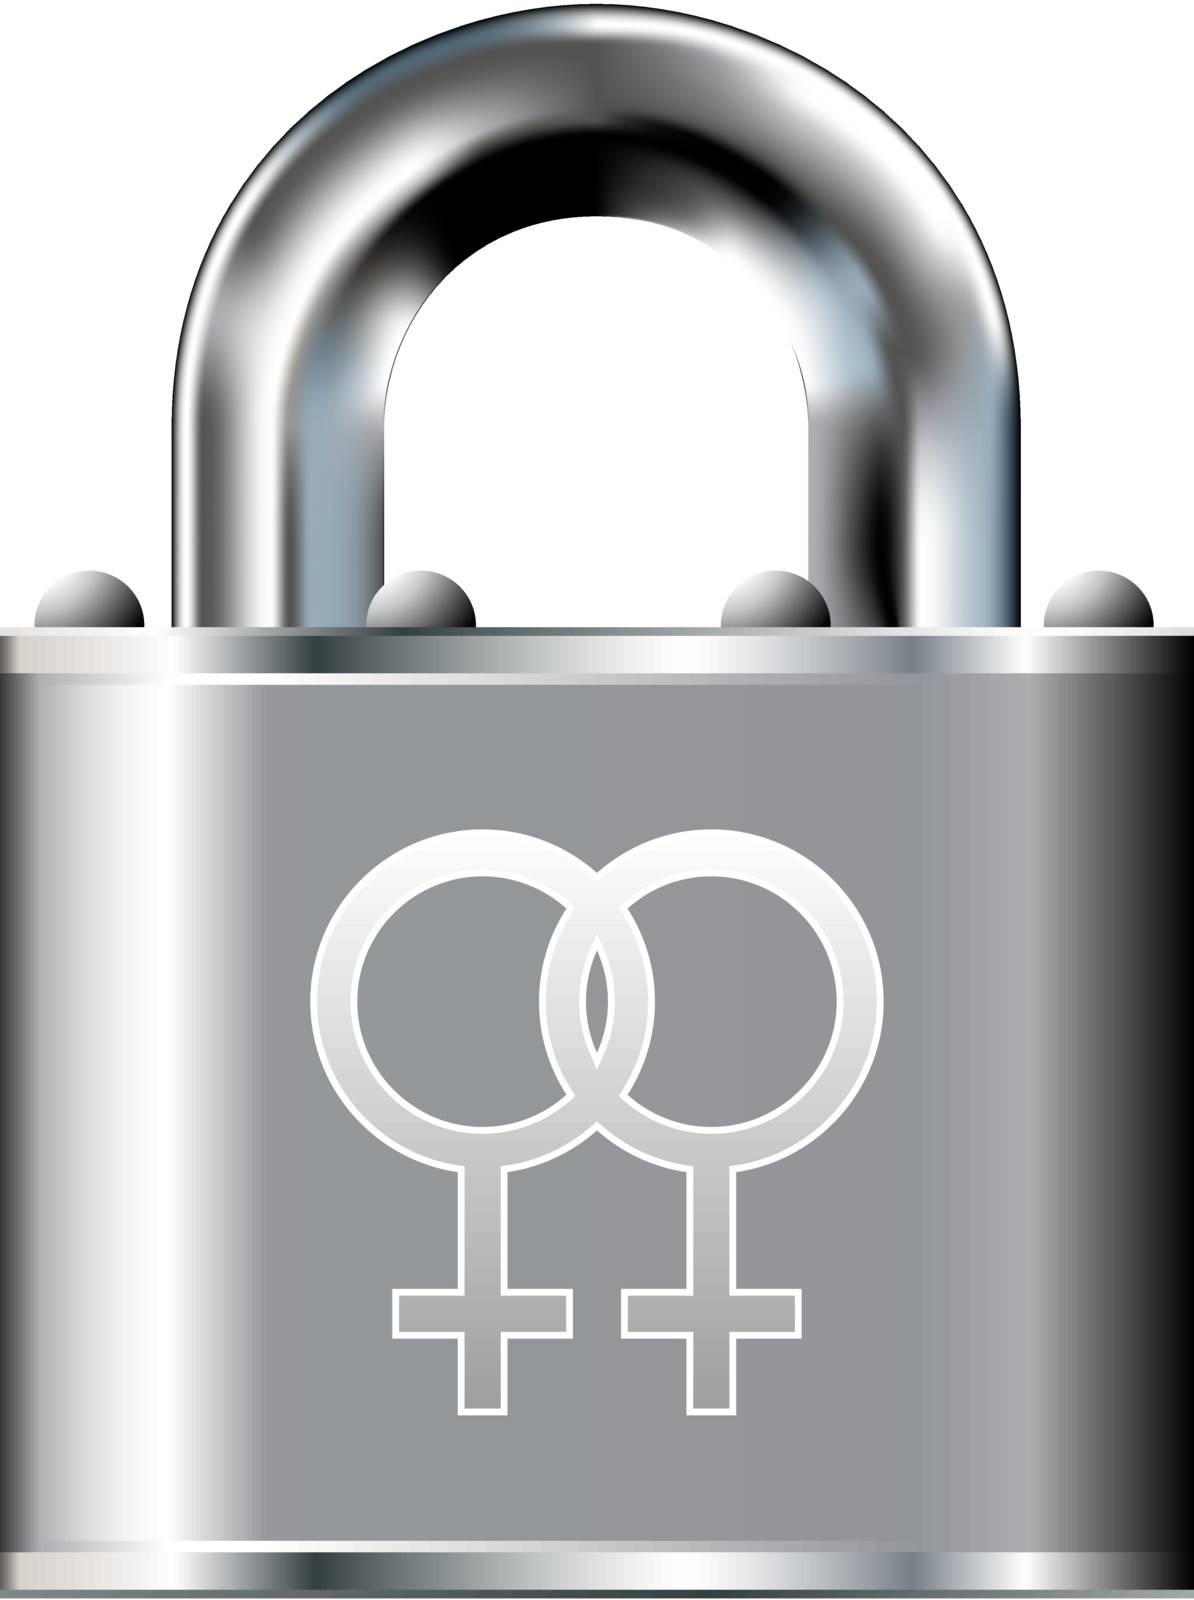 Double female or lesbian icon on stainless steel padlock vector button